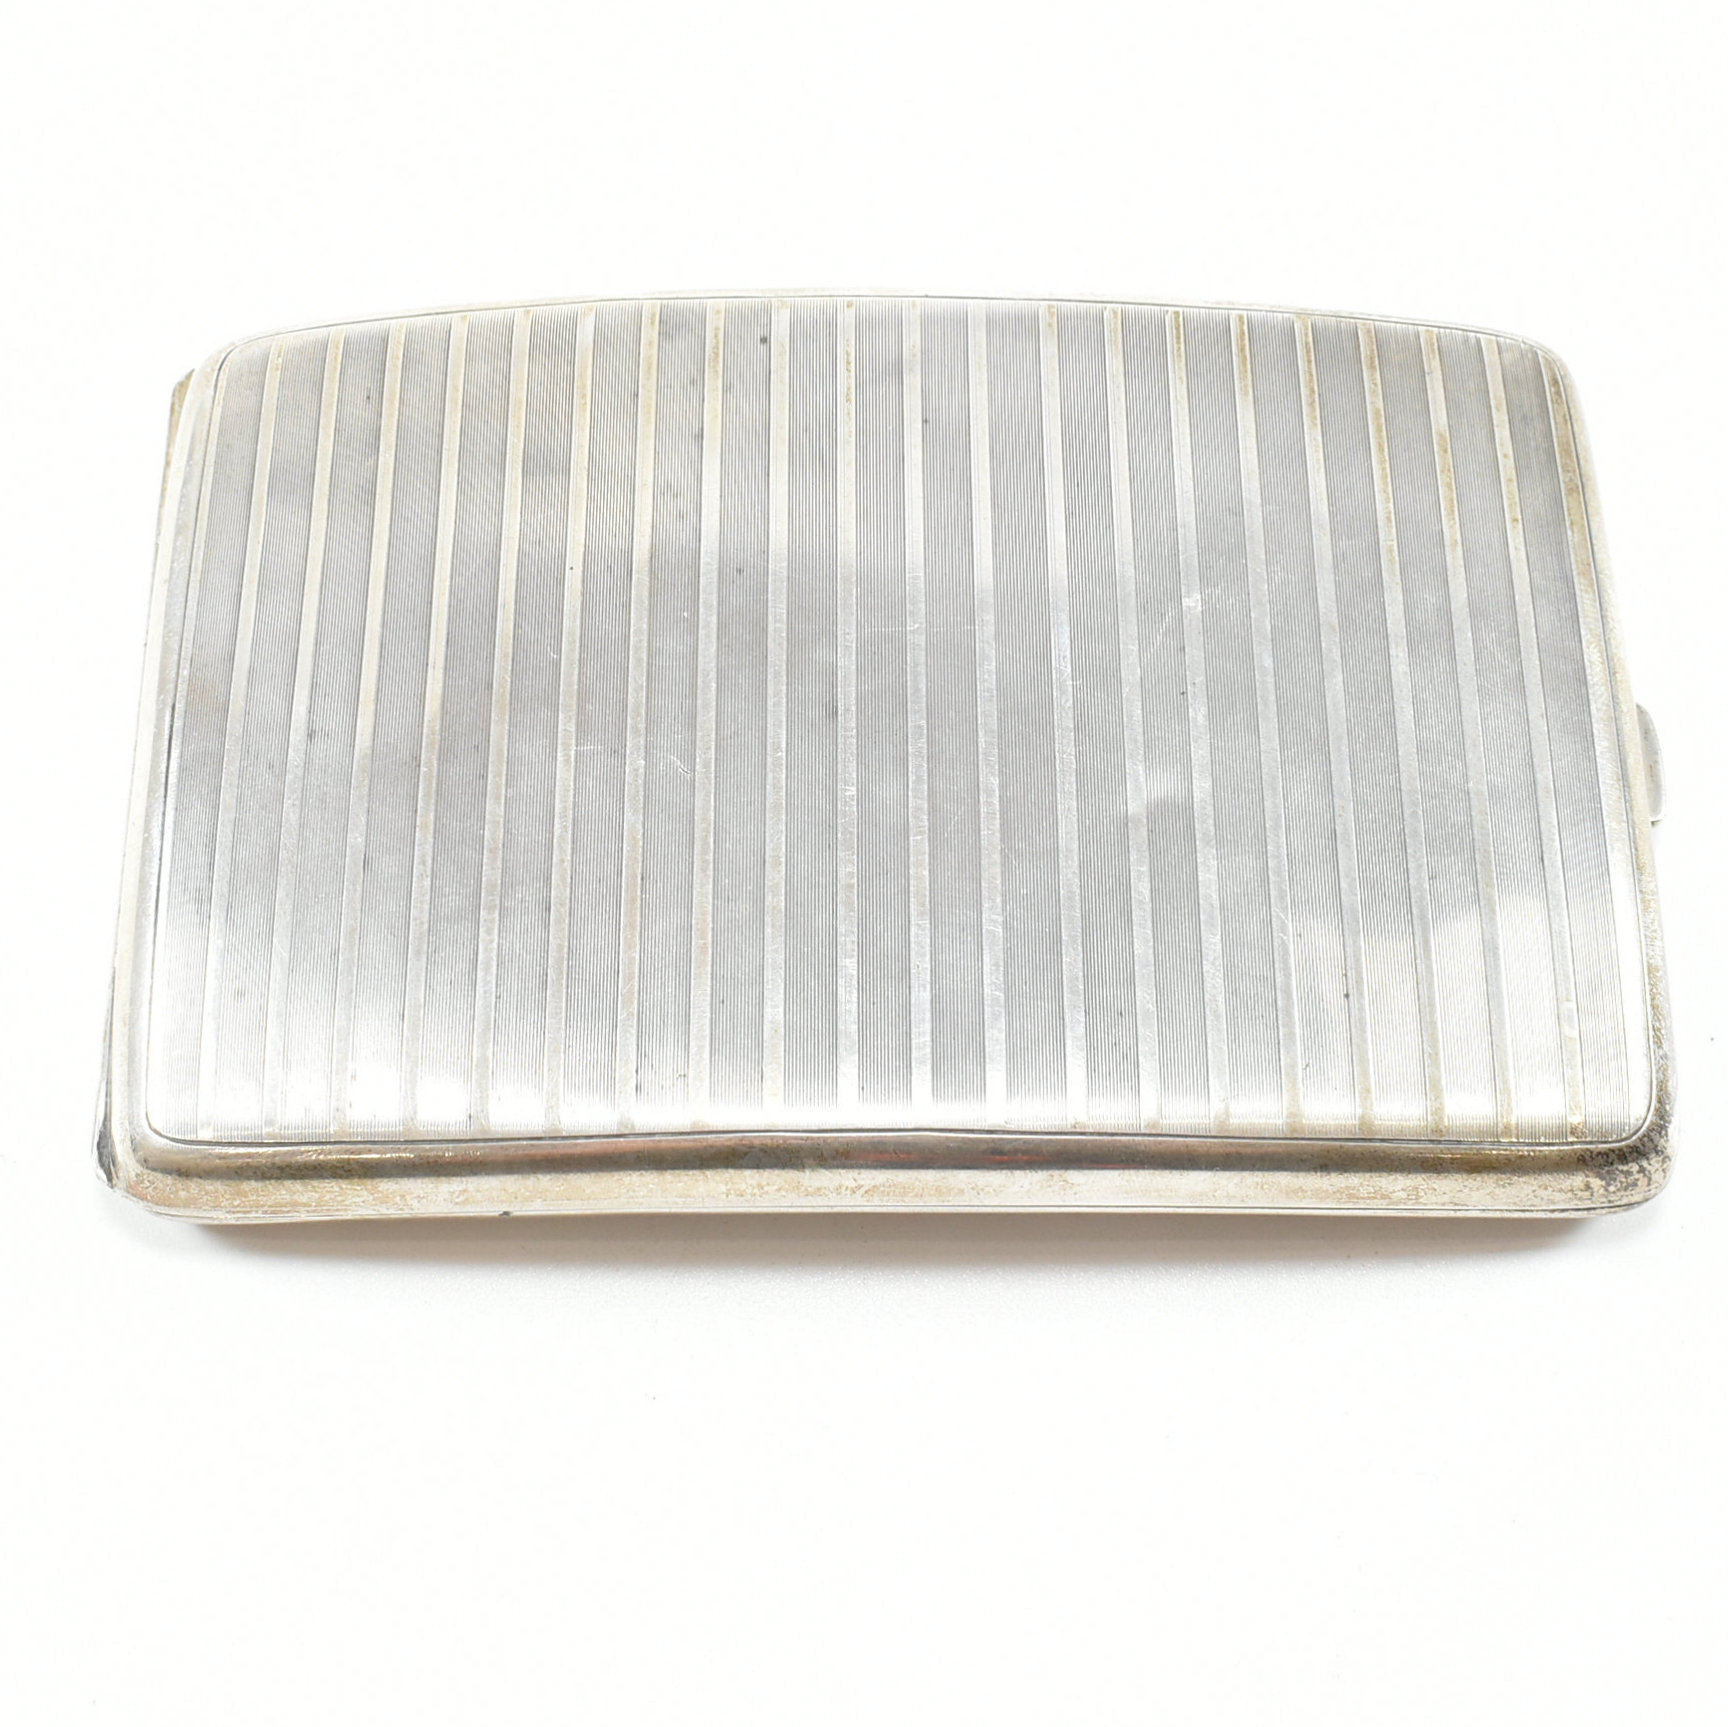 EARLY 20TH CENTURY HALLMARKED SILVER MAPPIN & WEBB CIGARETTE CASE - Image 7 of 8